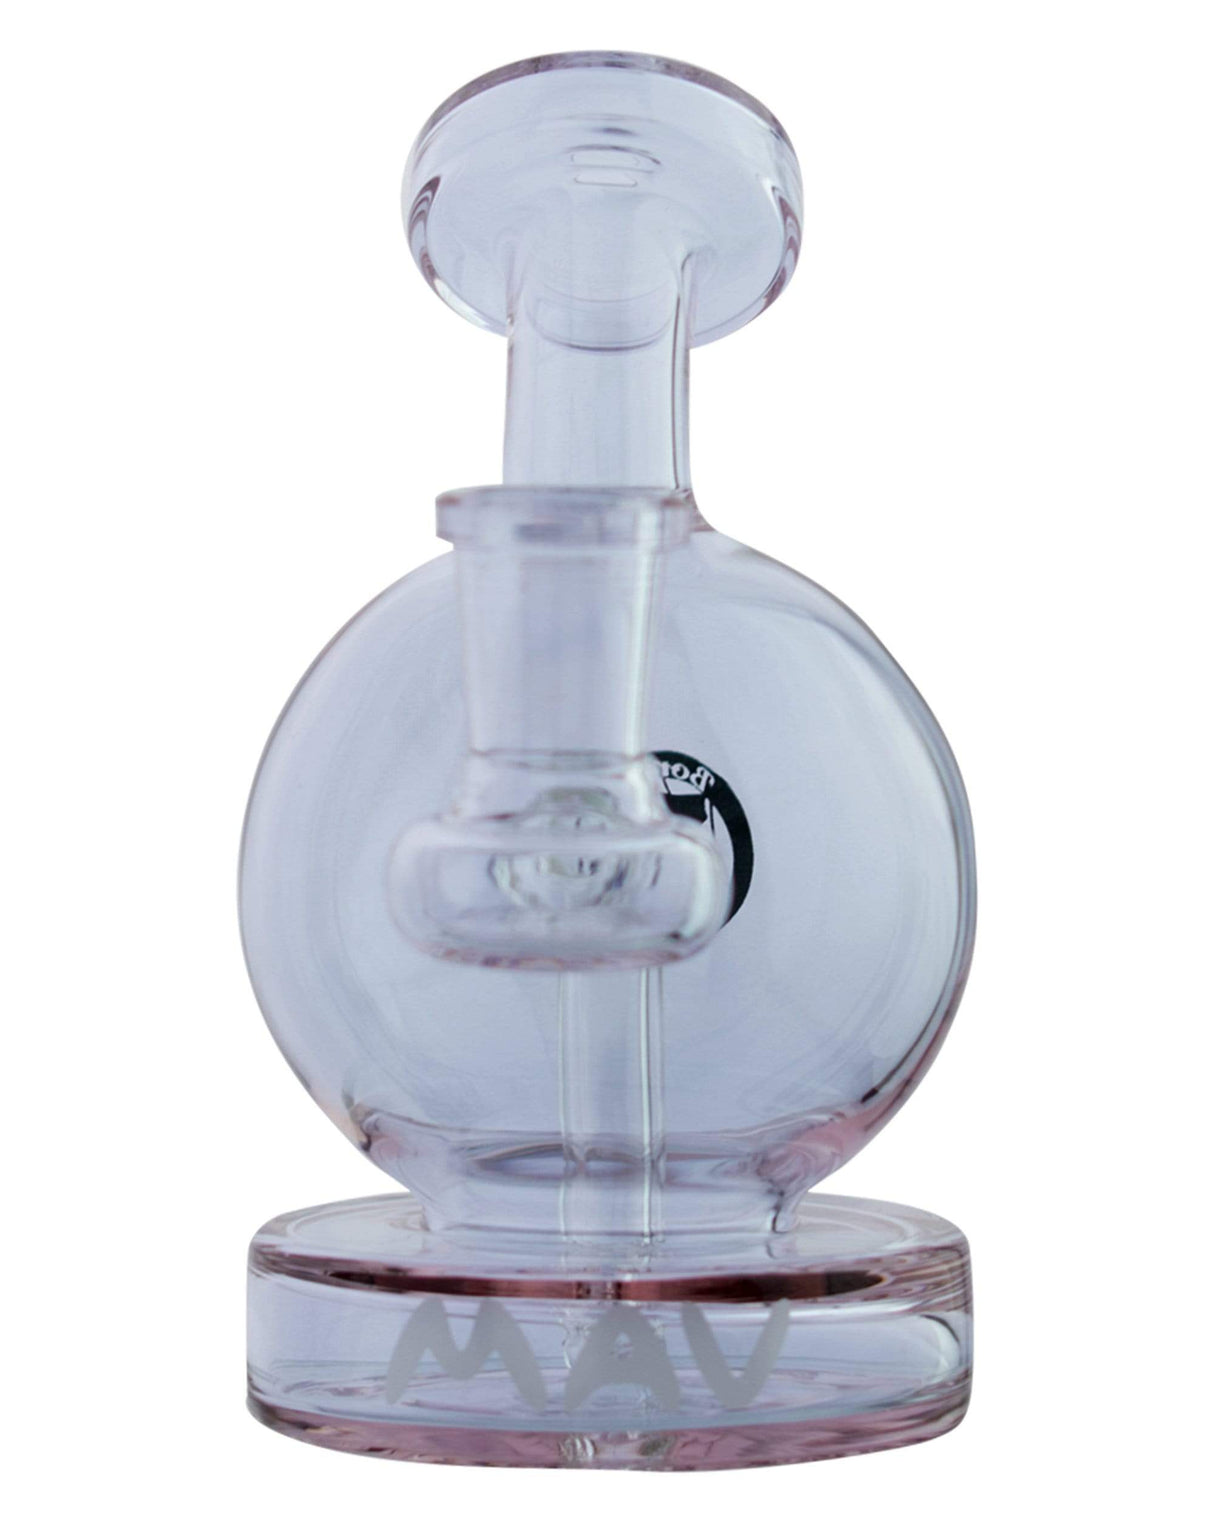 MAV Glass Vintage Bulb Mini Bong in Transparent Purple, Front View on White Background